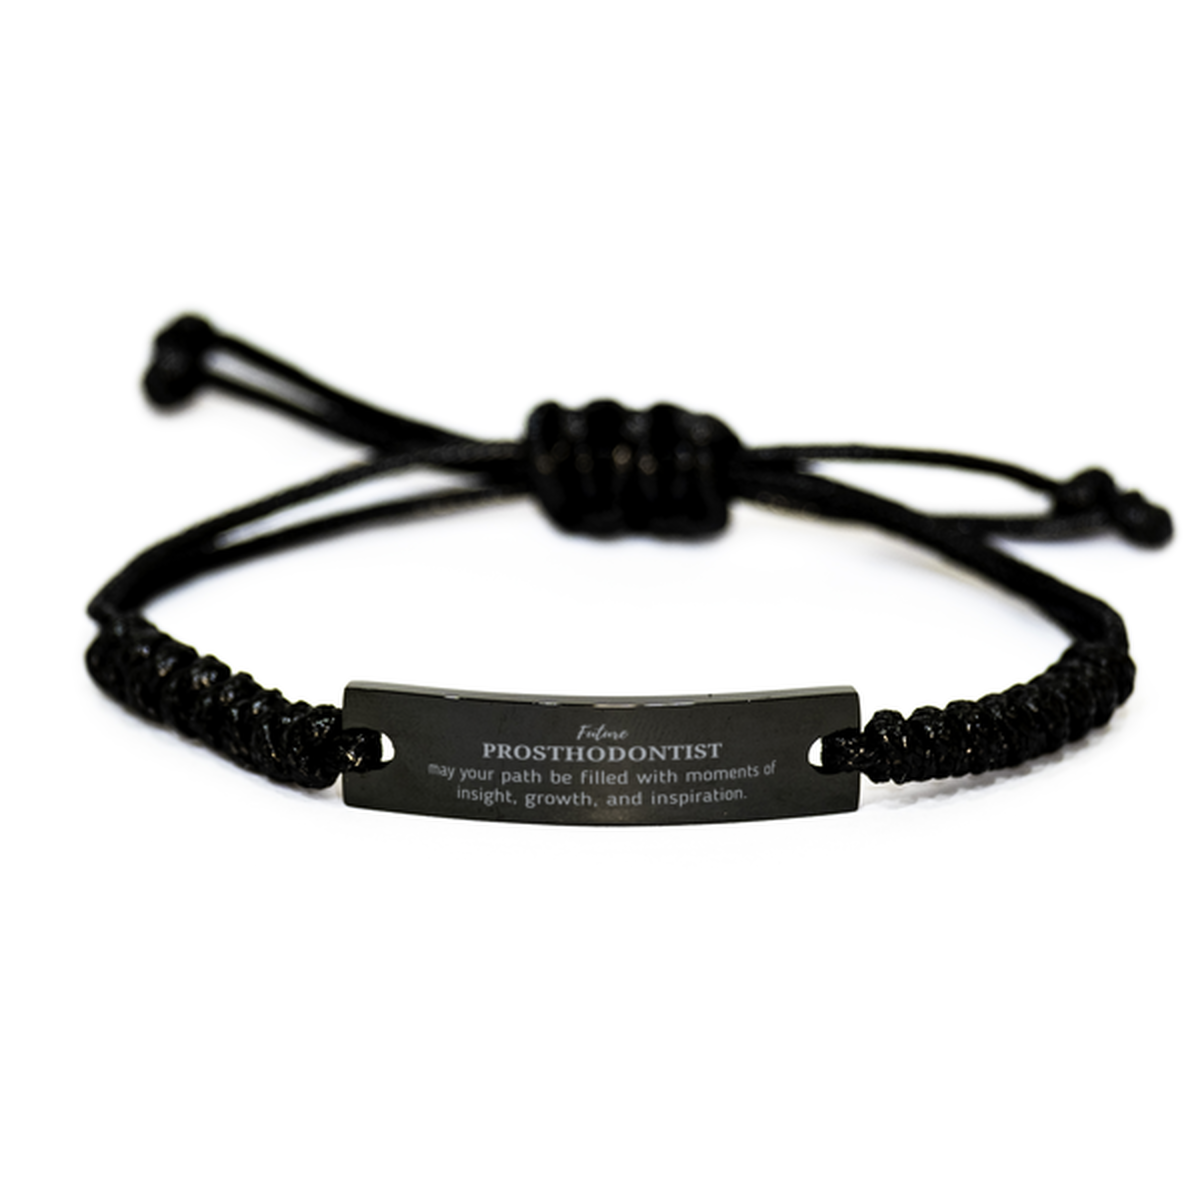 Future Prosthodontist Gifts, May your path be filled with moments of insight, Graduation Gifts for New Prosthodontist, Christmas Unique Black Rope Bracelet For Men, Women, Friends